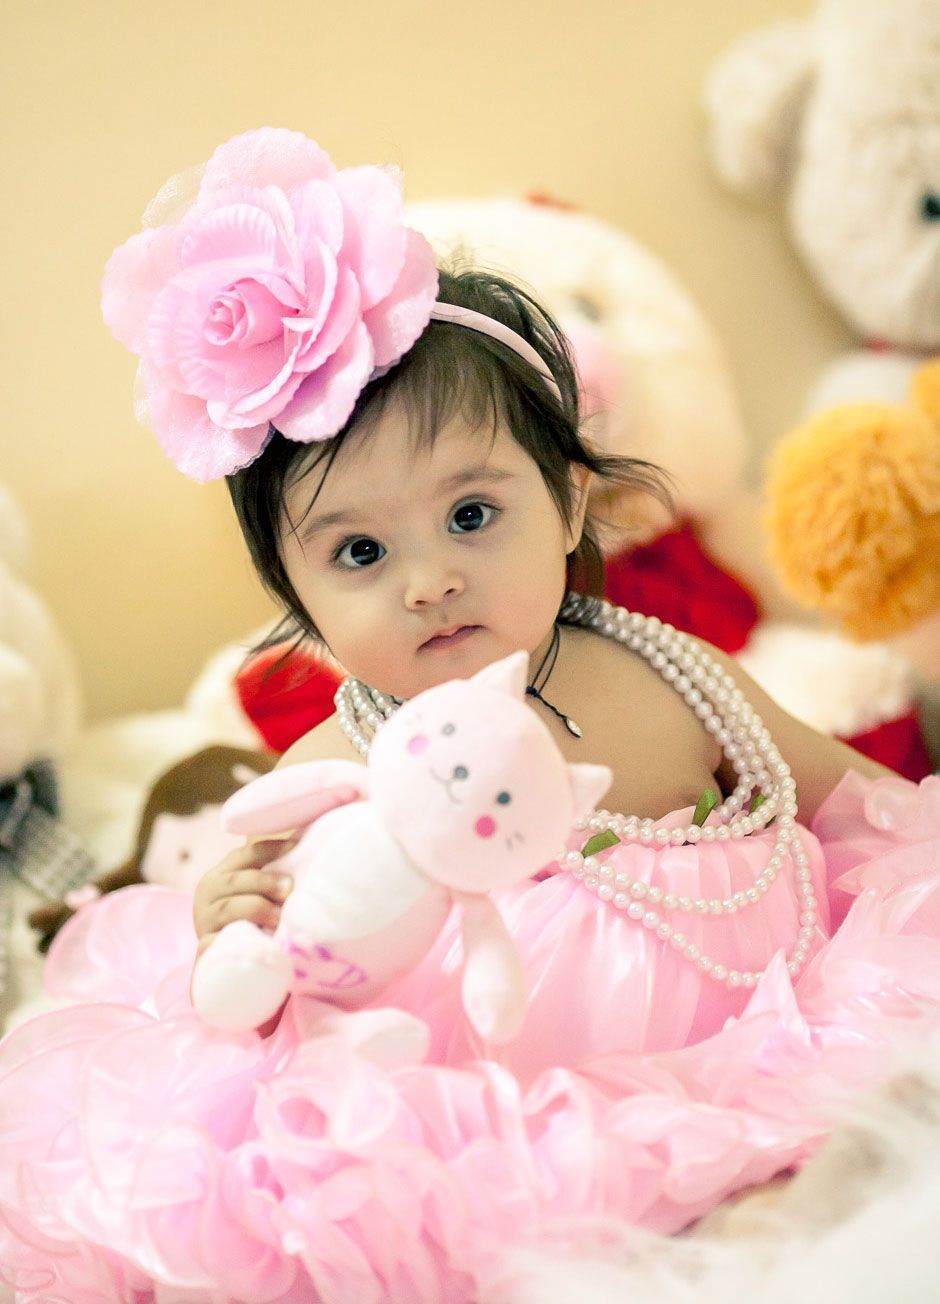 Best child photography India cutest thing on earth!. Newborn photography girl, Cute baby wallpaper, Baby girl picture